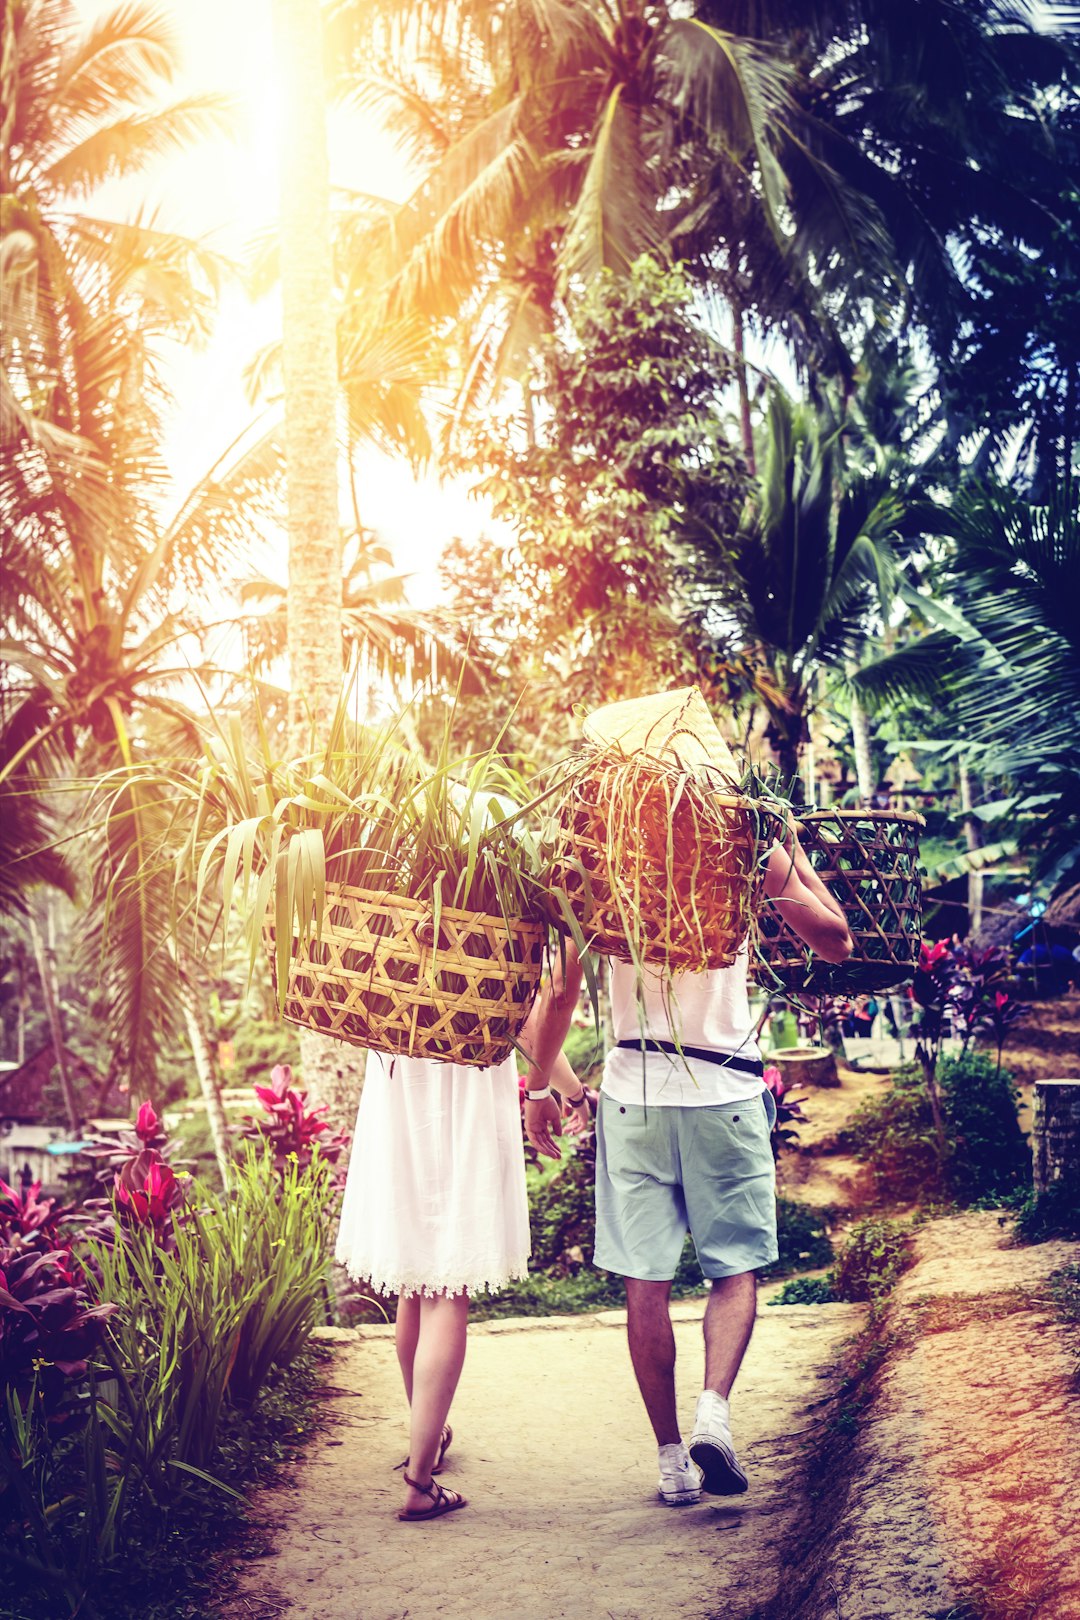 man and woman walking and carrying basket walking on pathway surrounded with plants and trees